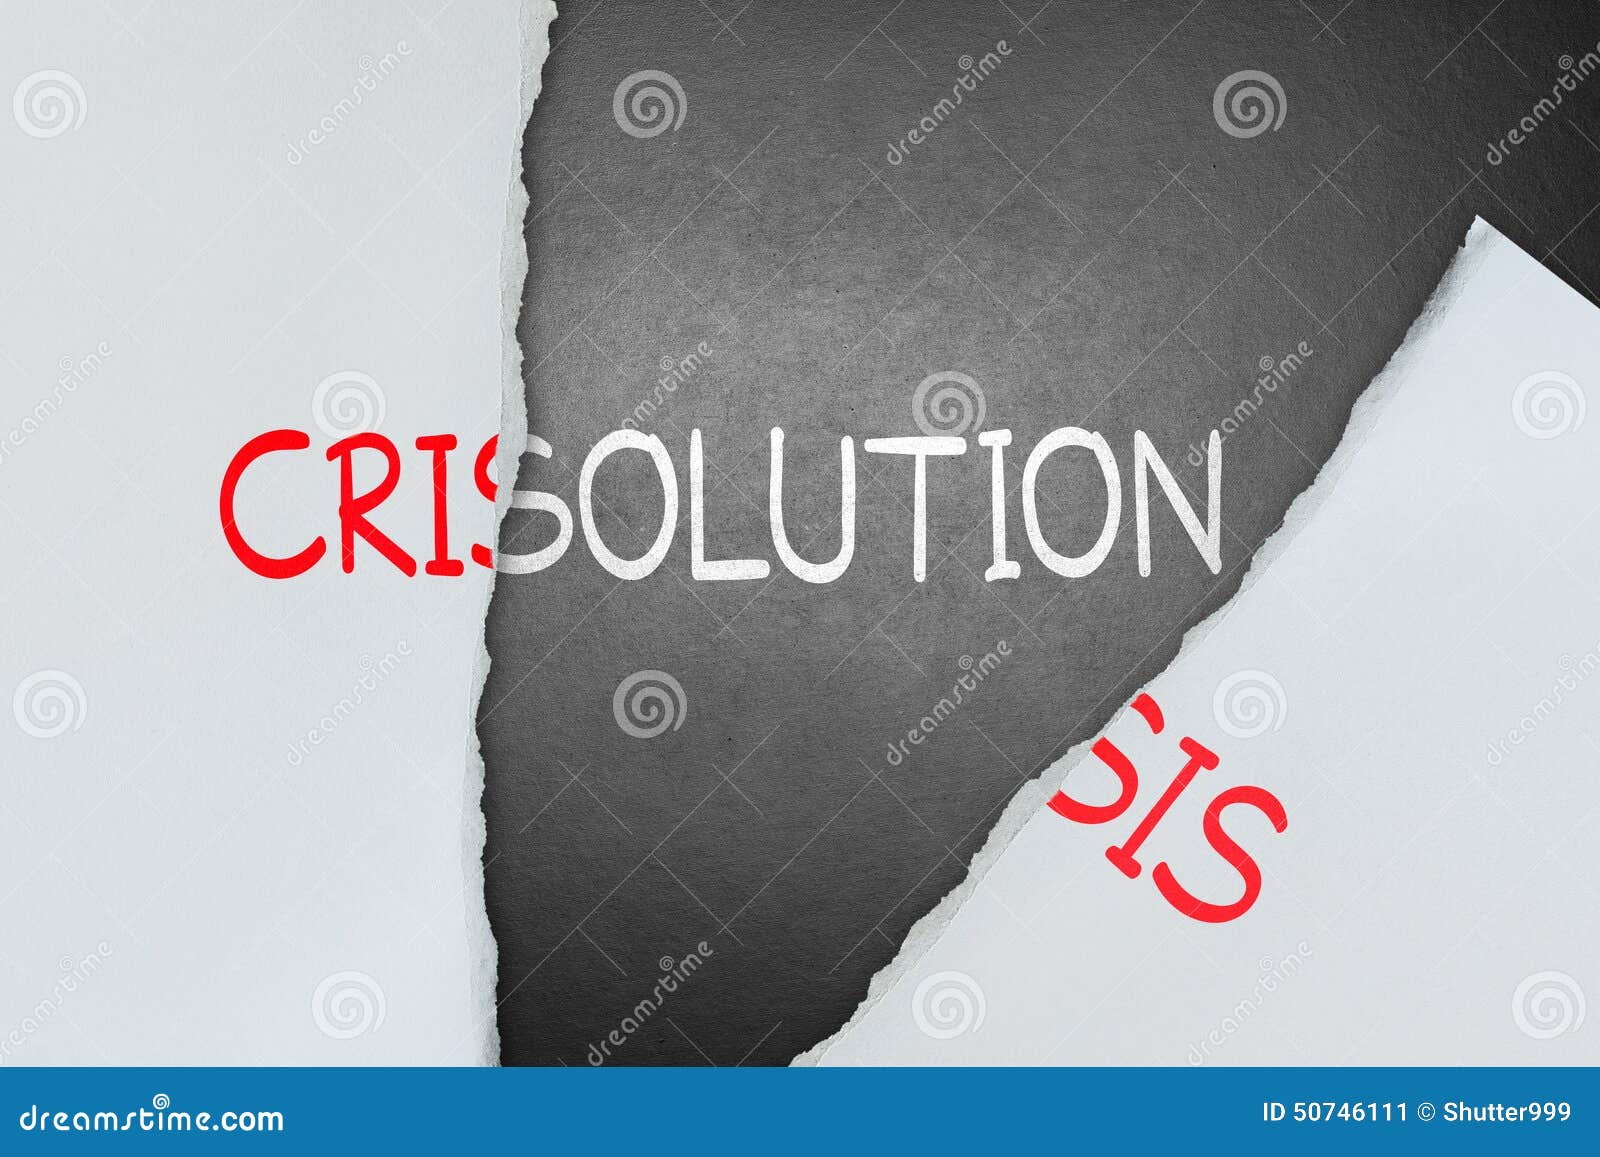 find solution for crisis